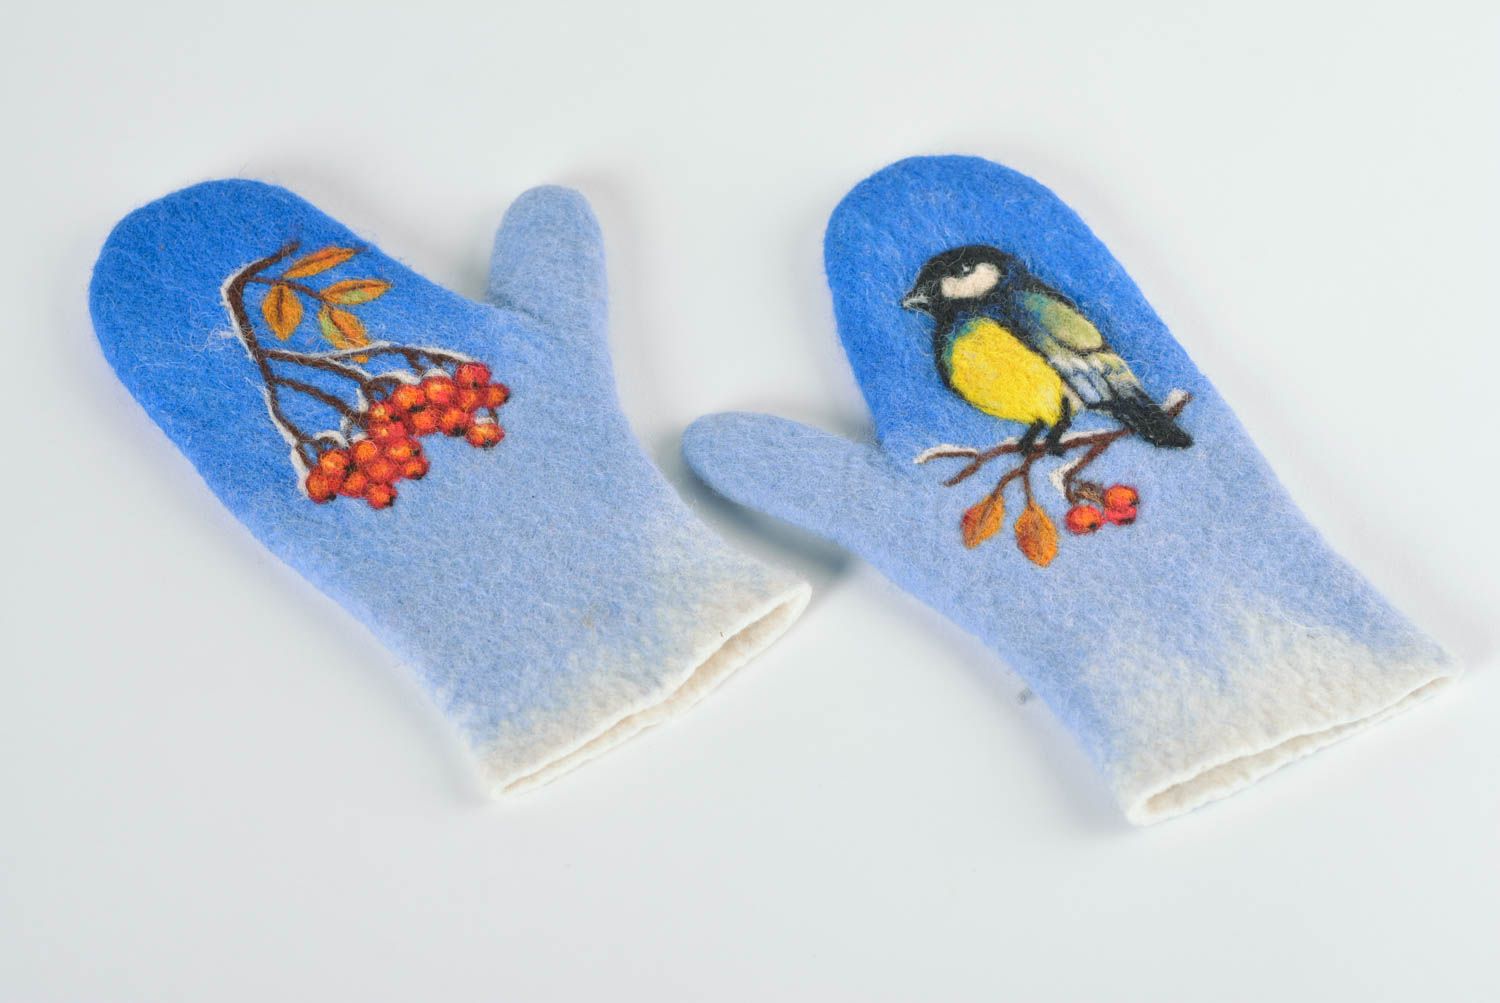 Handmade felted mittens wool knit mittens wool mittens mittens with a bird image photo 2